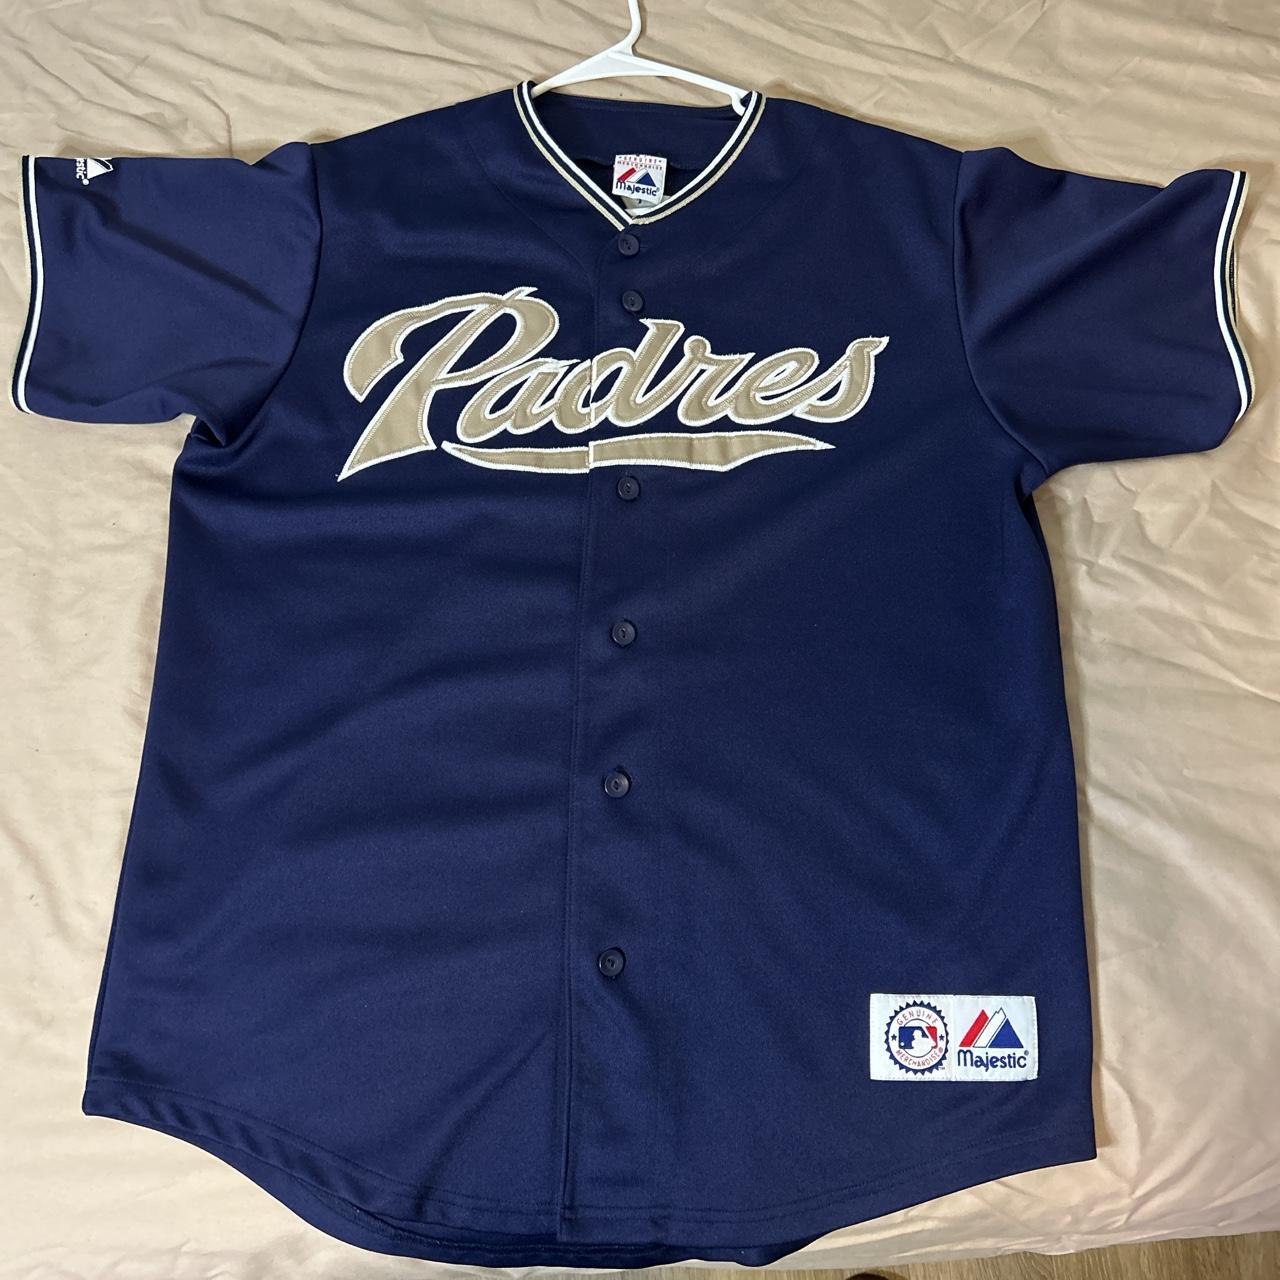 San Diego Padres Blank Navy Blue Jersey on sale,for Cheap